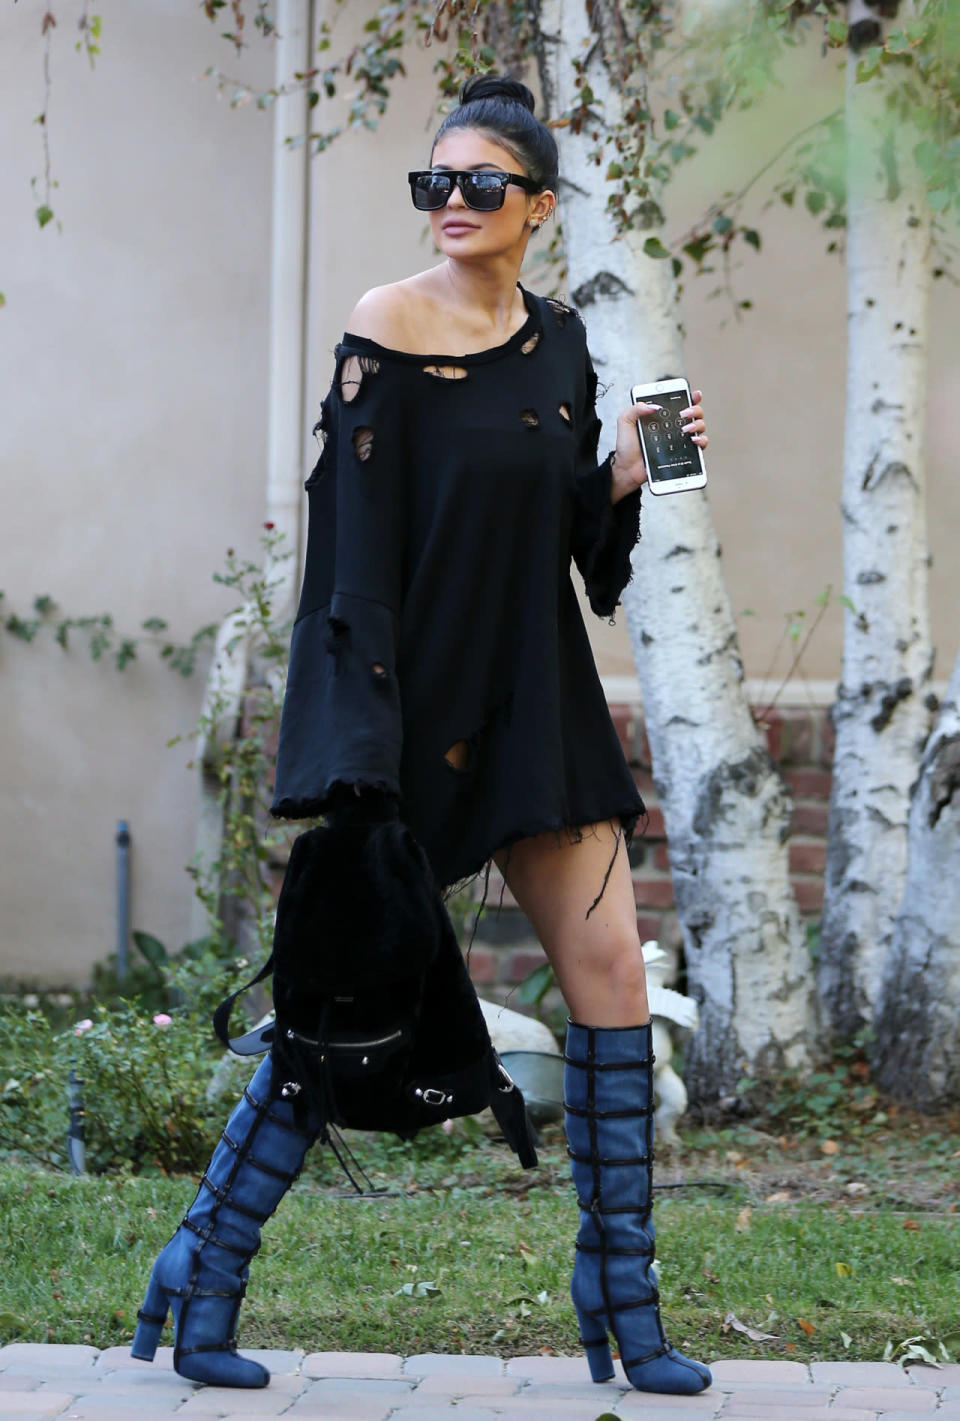 Kylie Jenner wears a shredded shift dress and cage boots in Los Angeles.